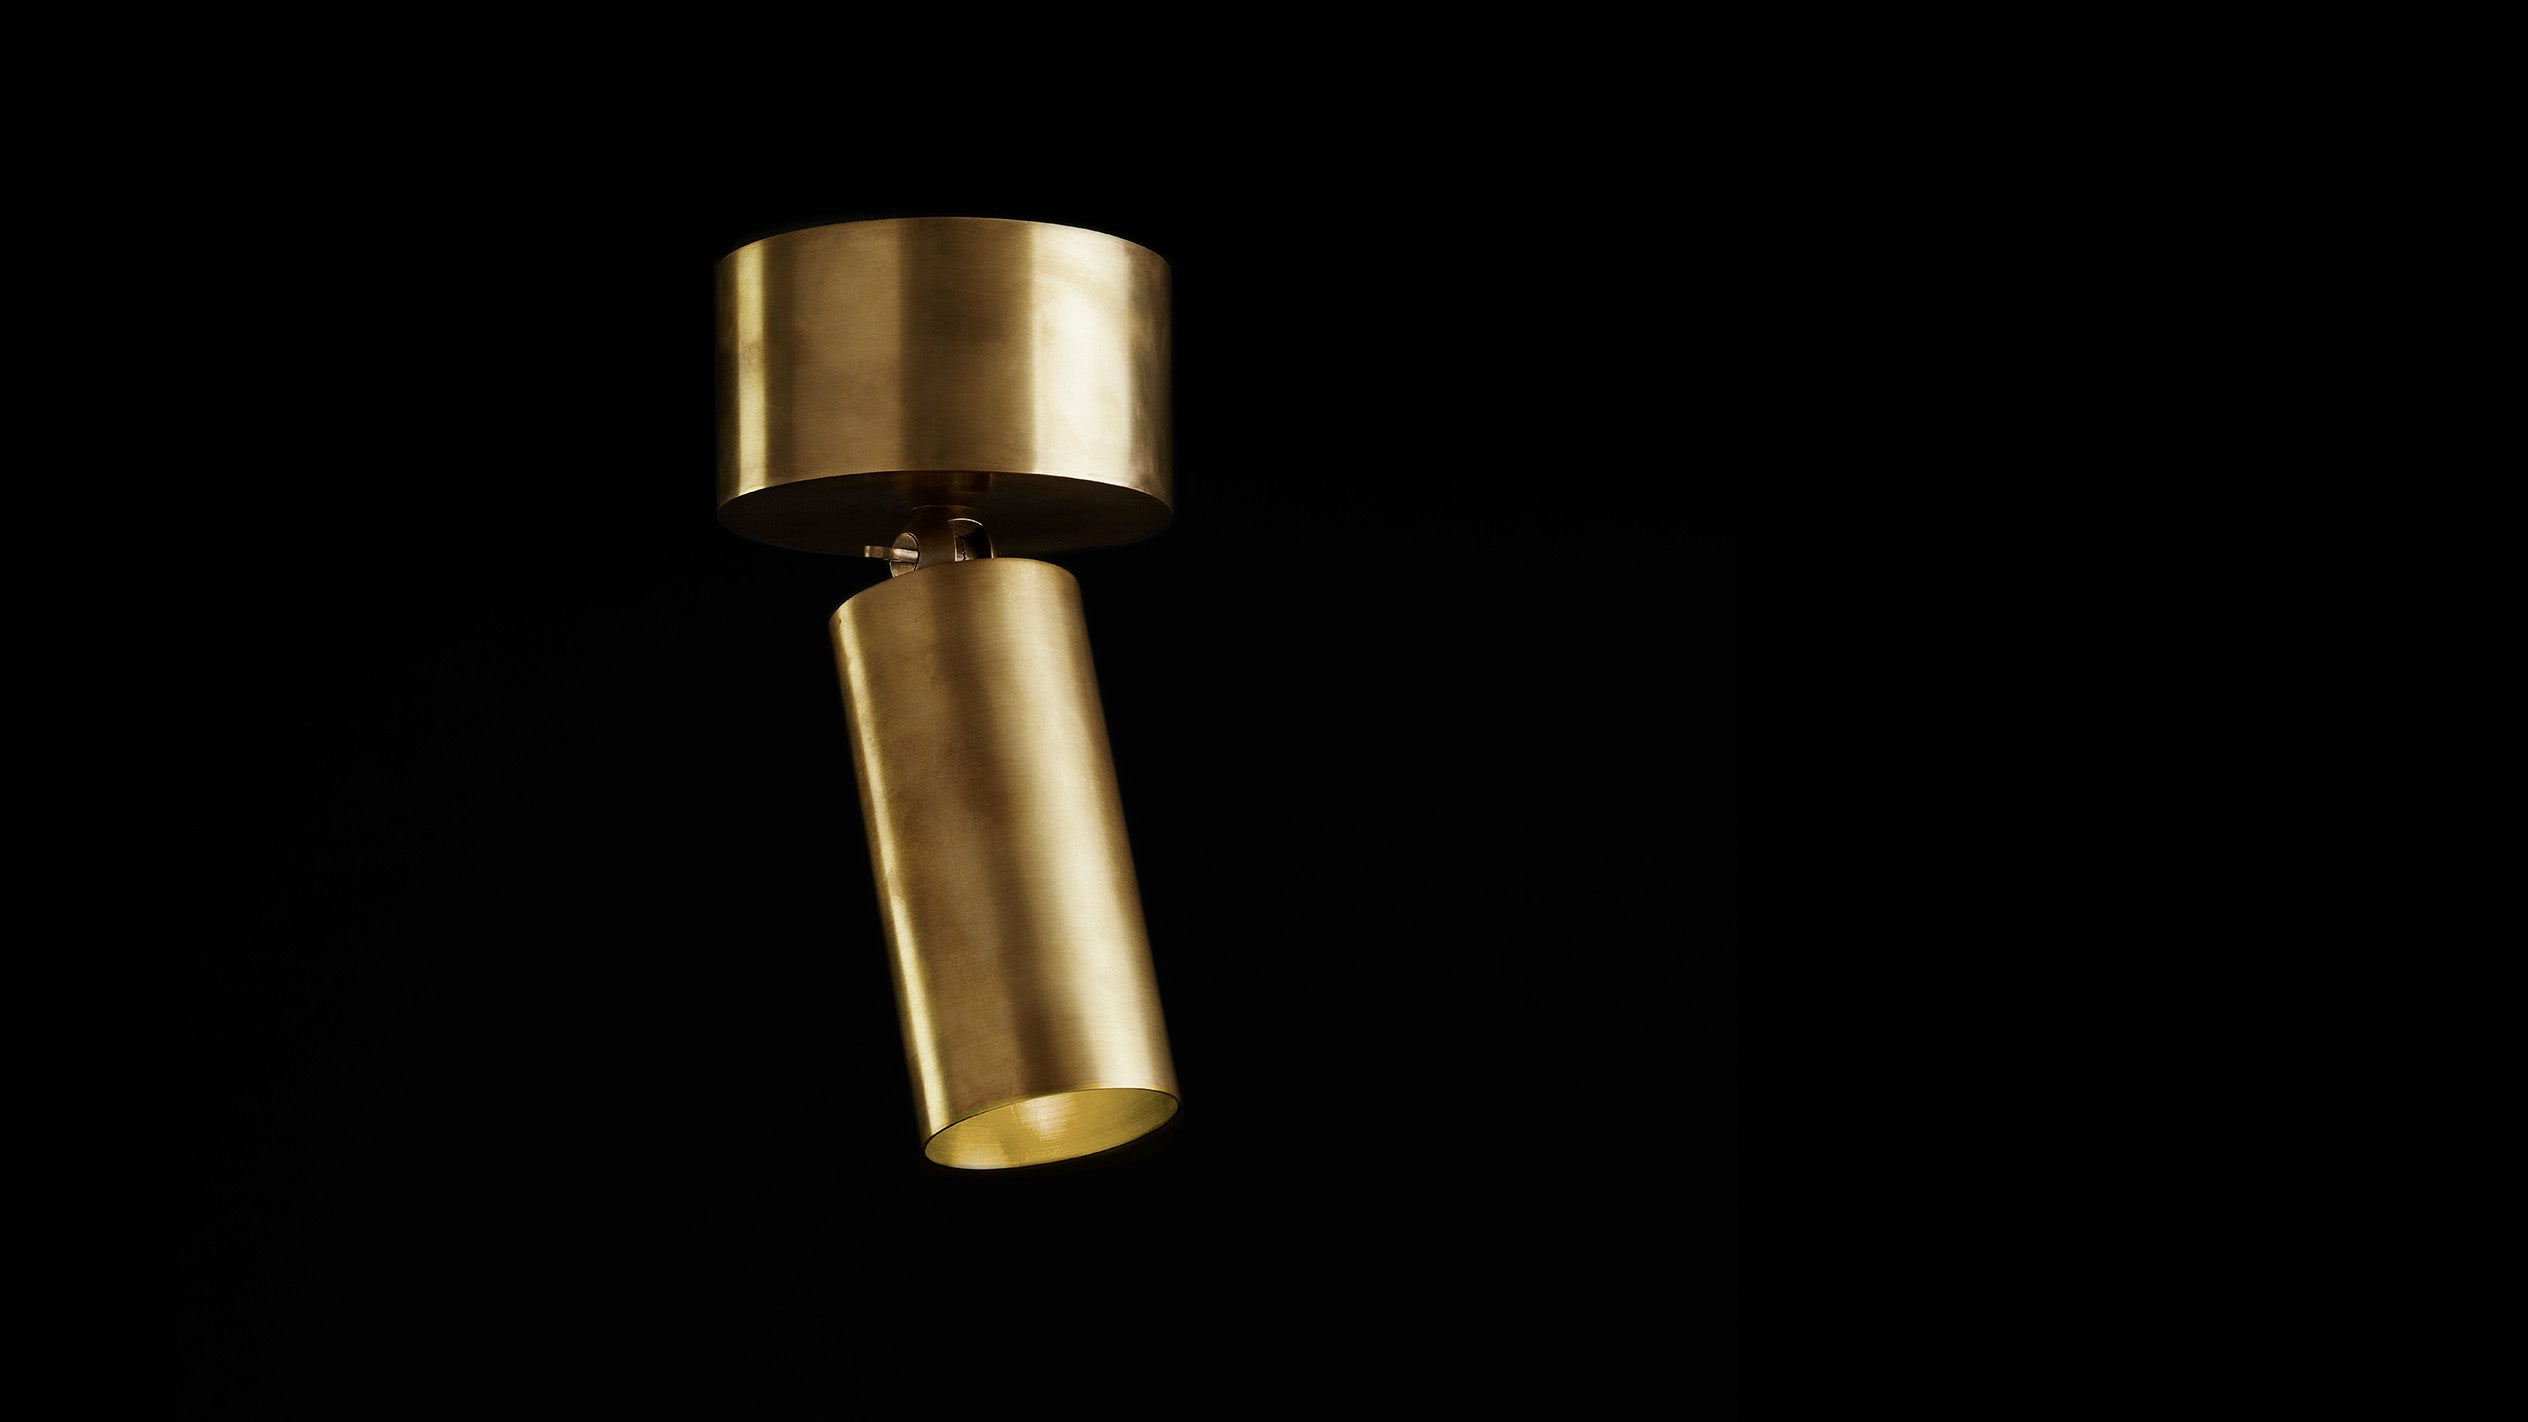 Ceiling mounted CYLINDER spotlight in Aged Brass finish.